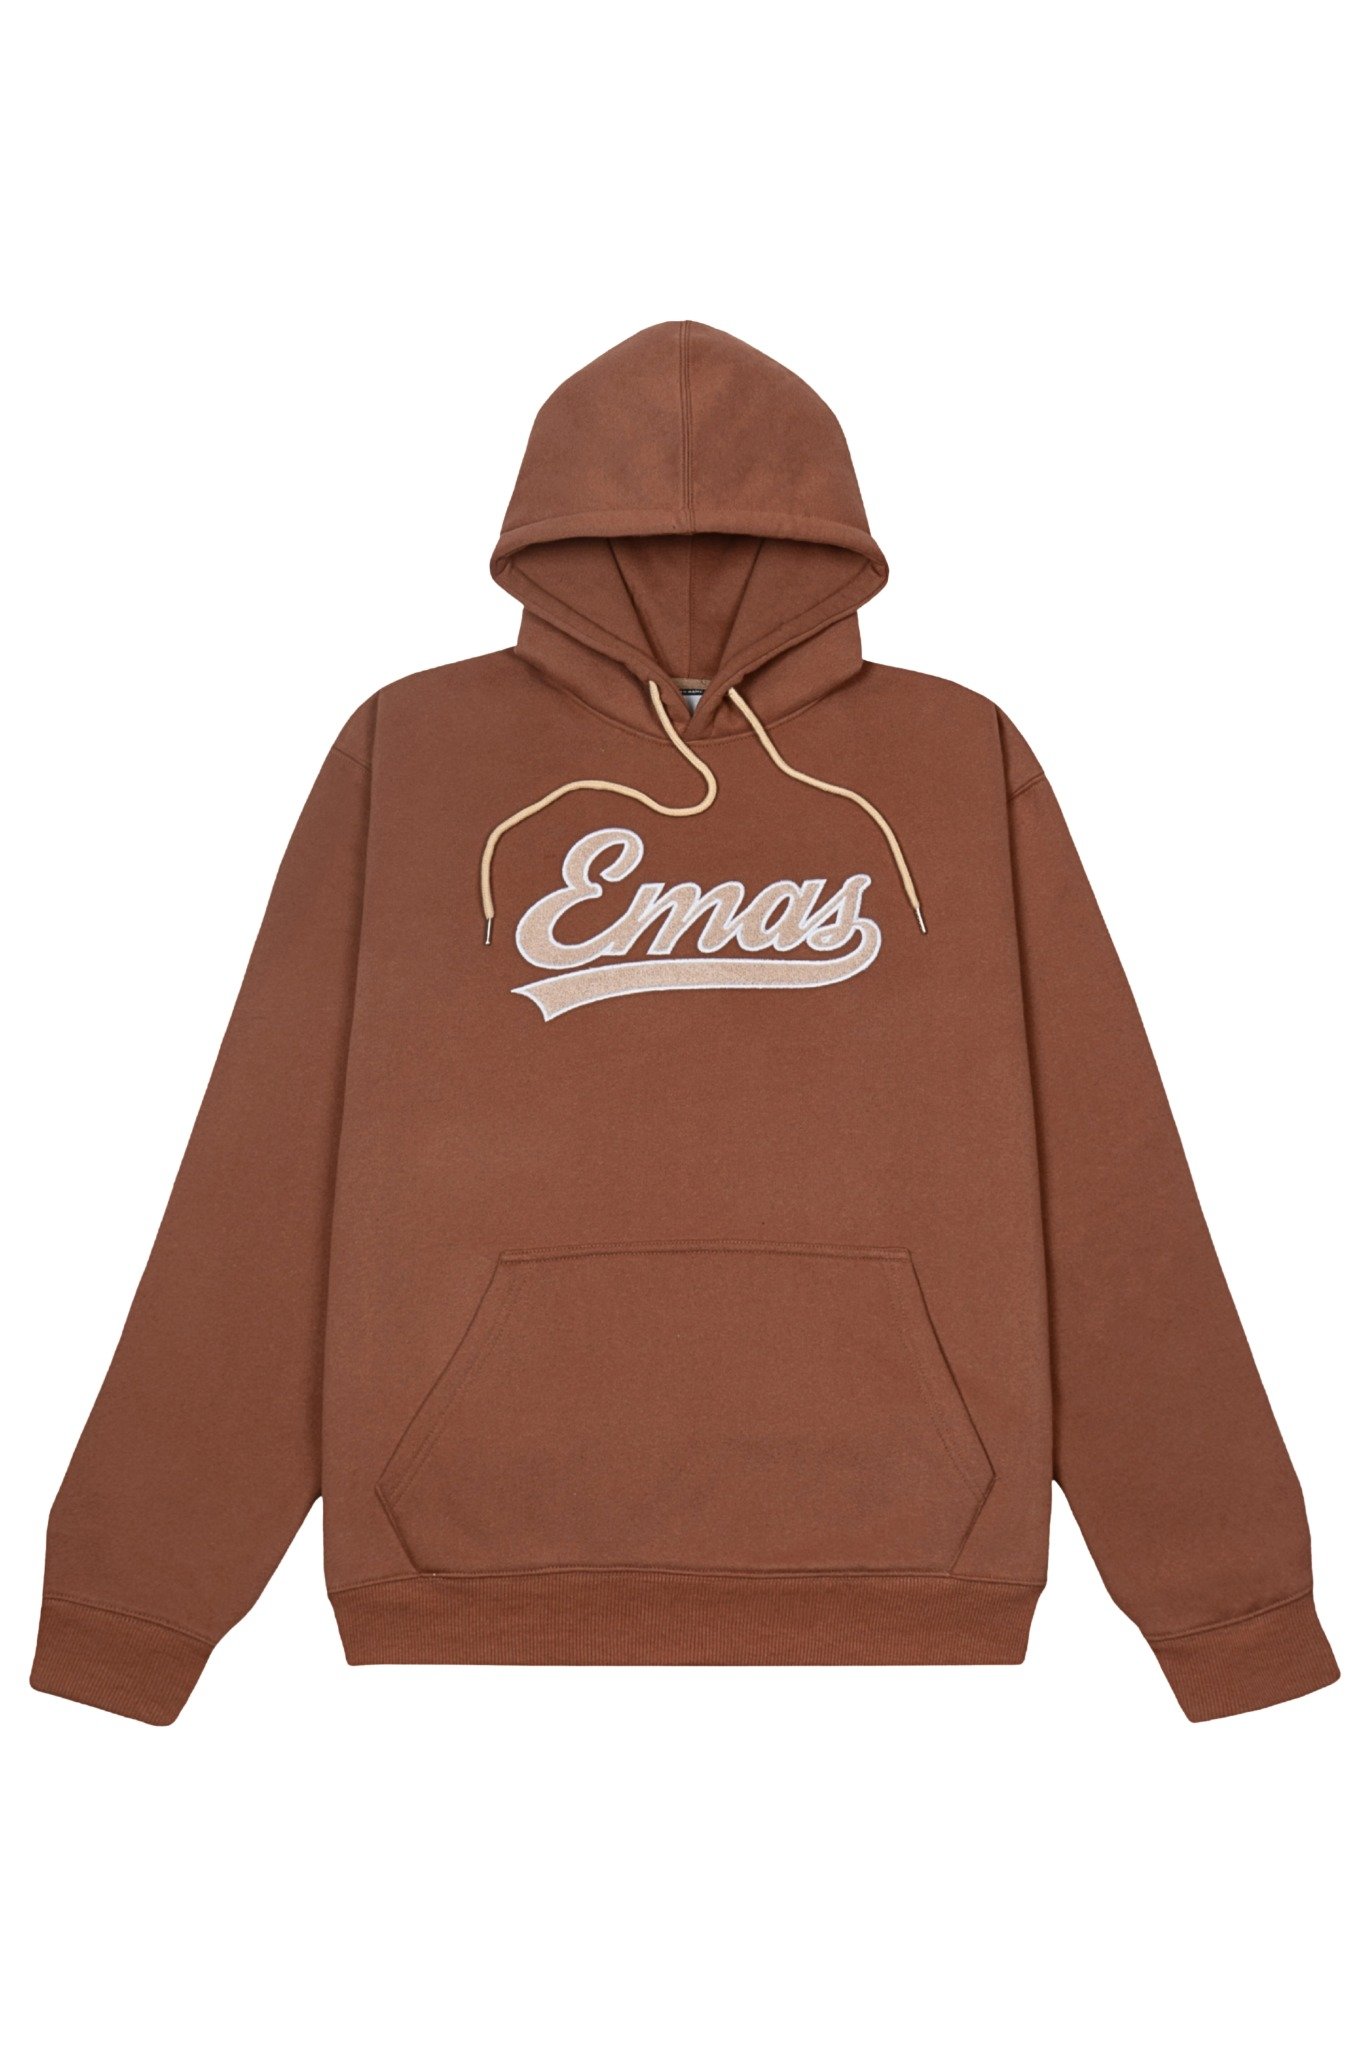  BROWN EMBROIDERED HOODIE 